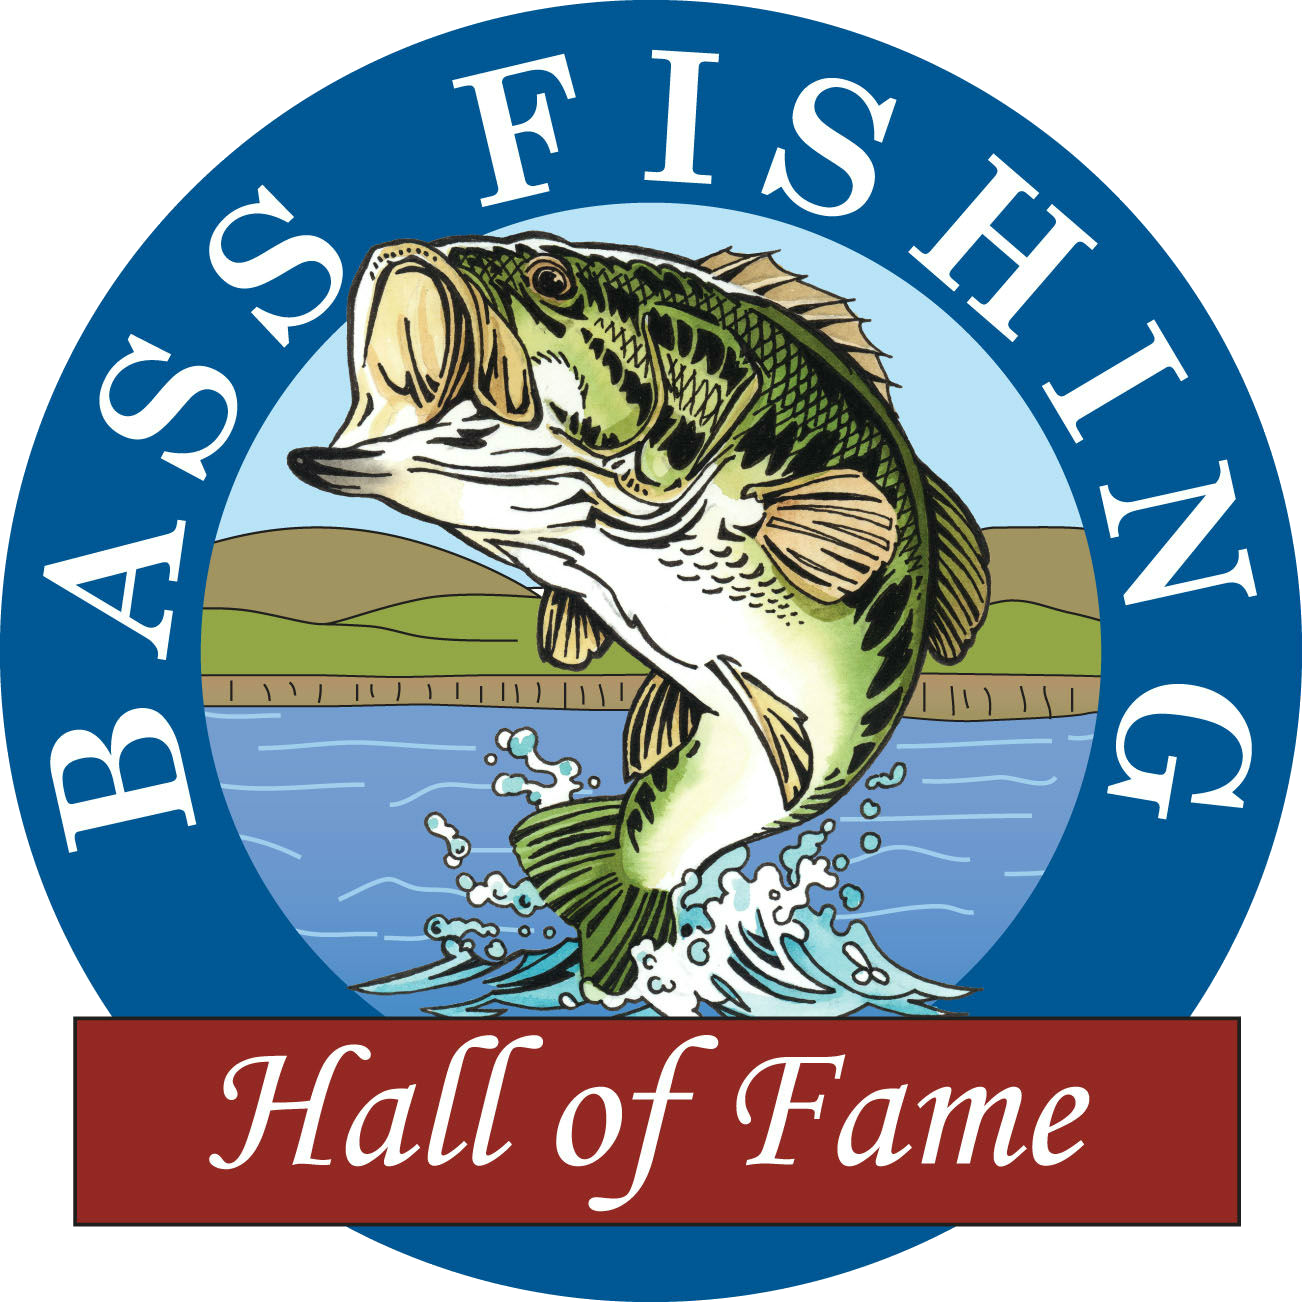 Jimmy Houston - The Bass Fishing Hall Of Fame